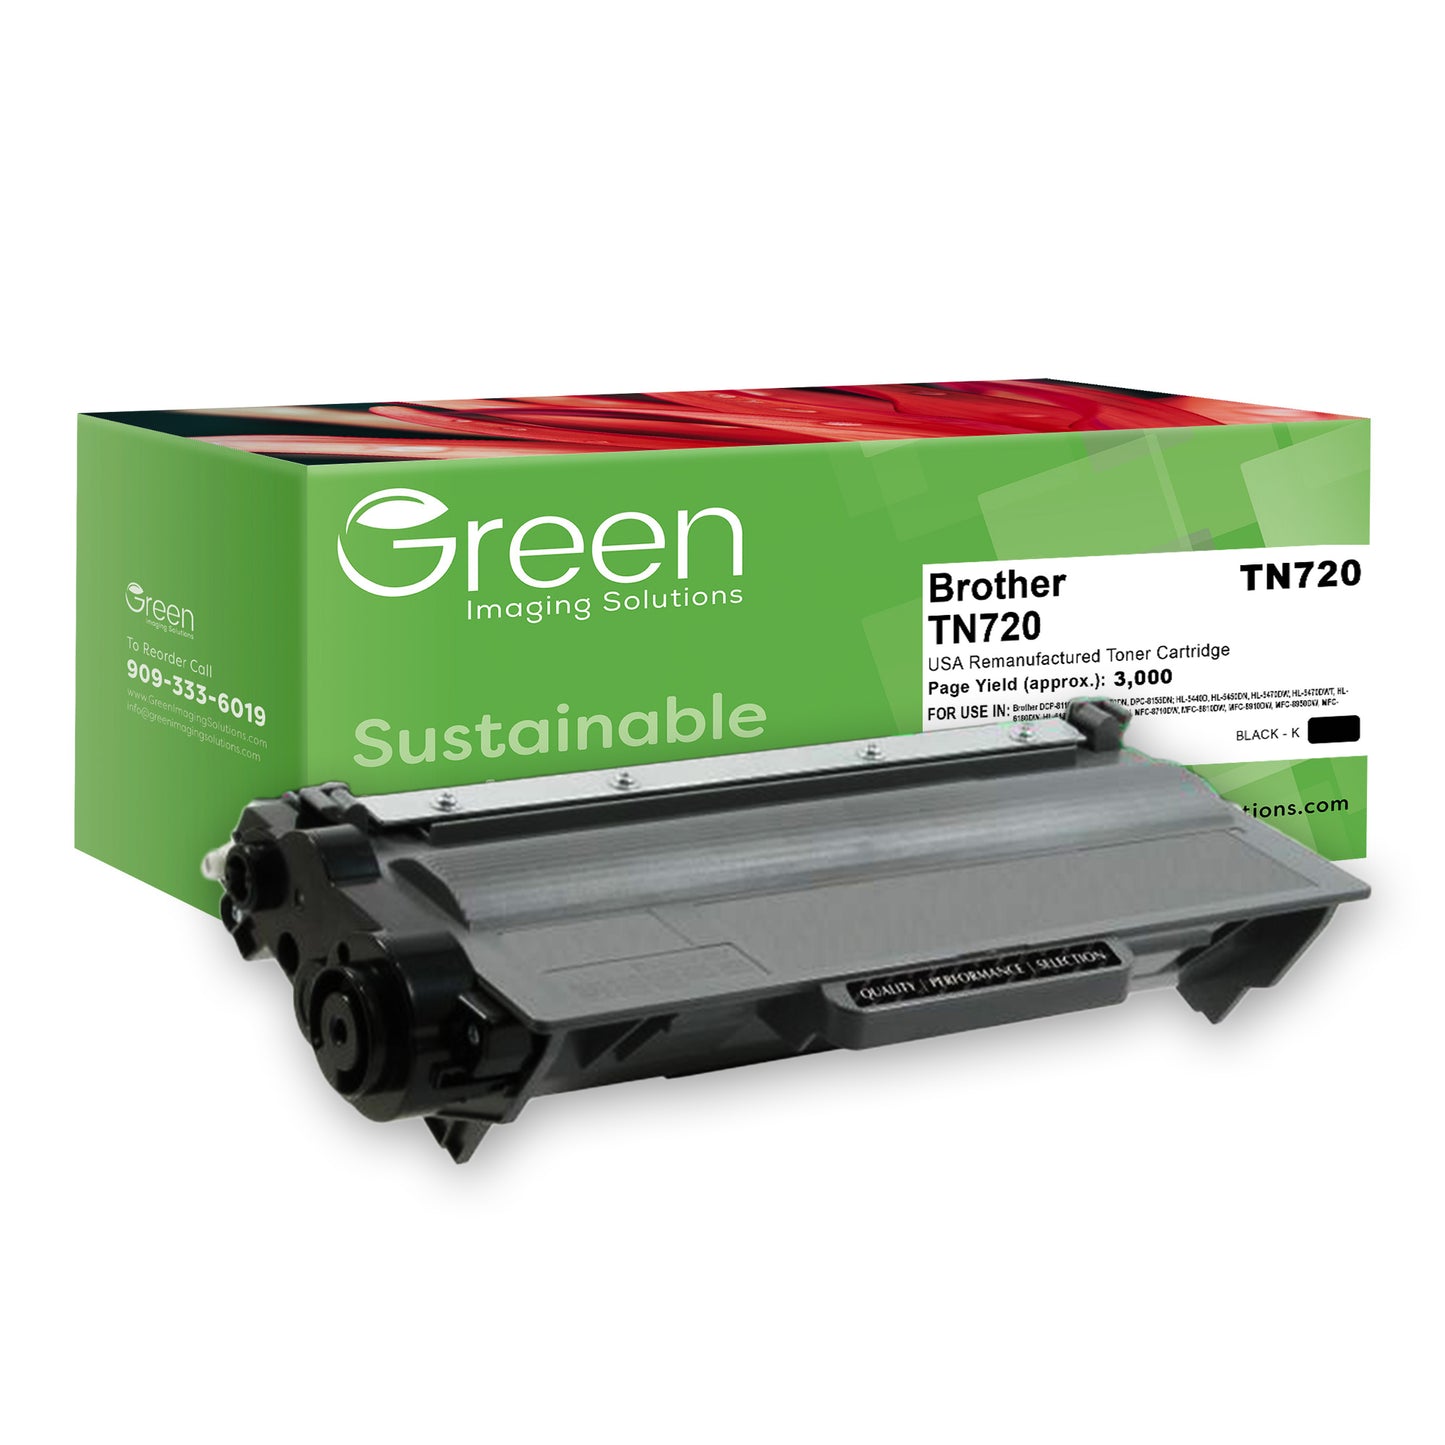 Green Imaging Solutions USA Remanufactured Toner Cartridge for Brother TN720